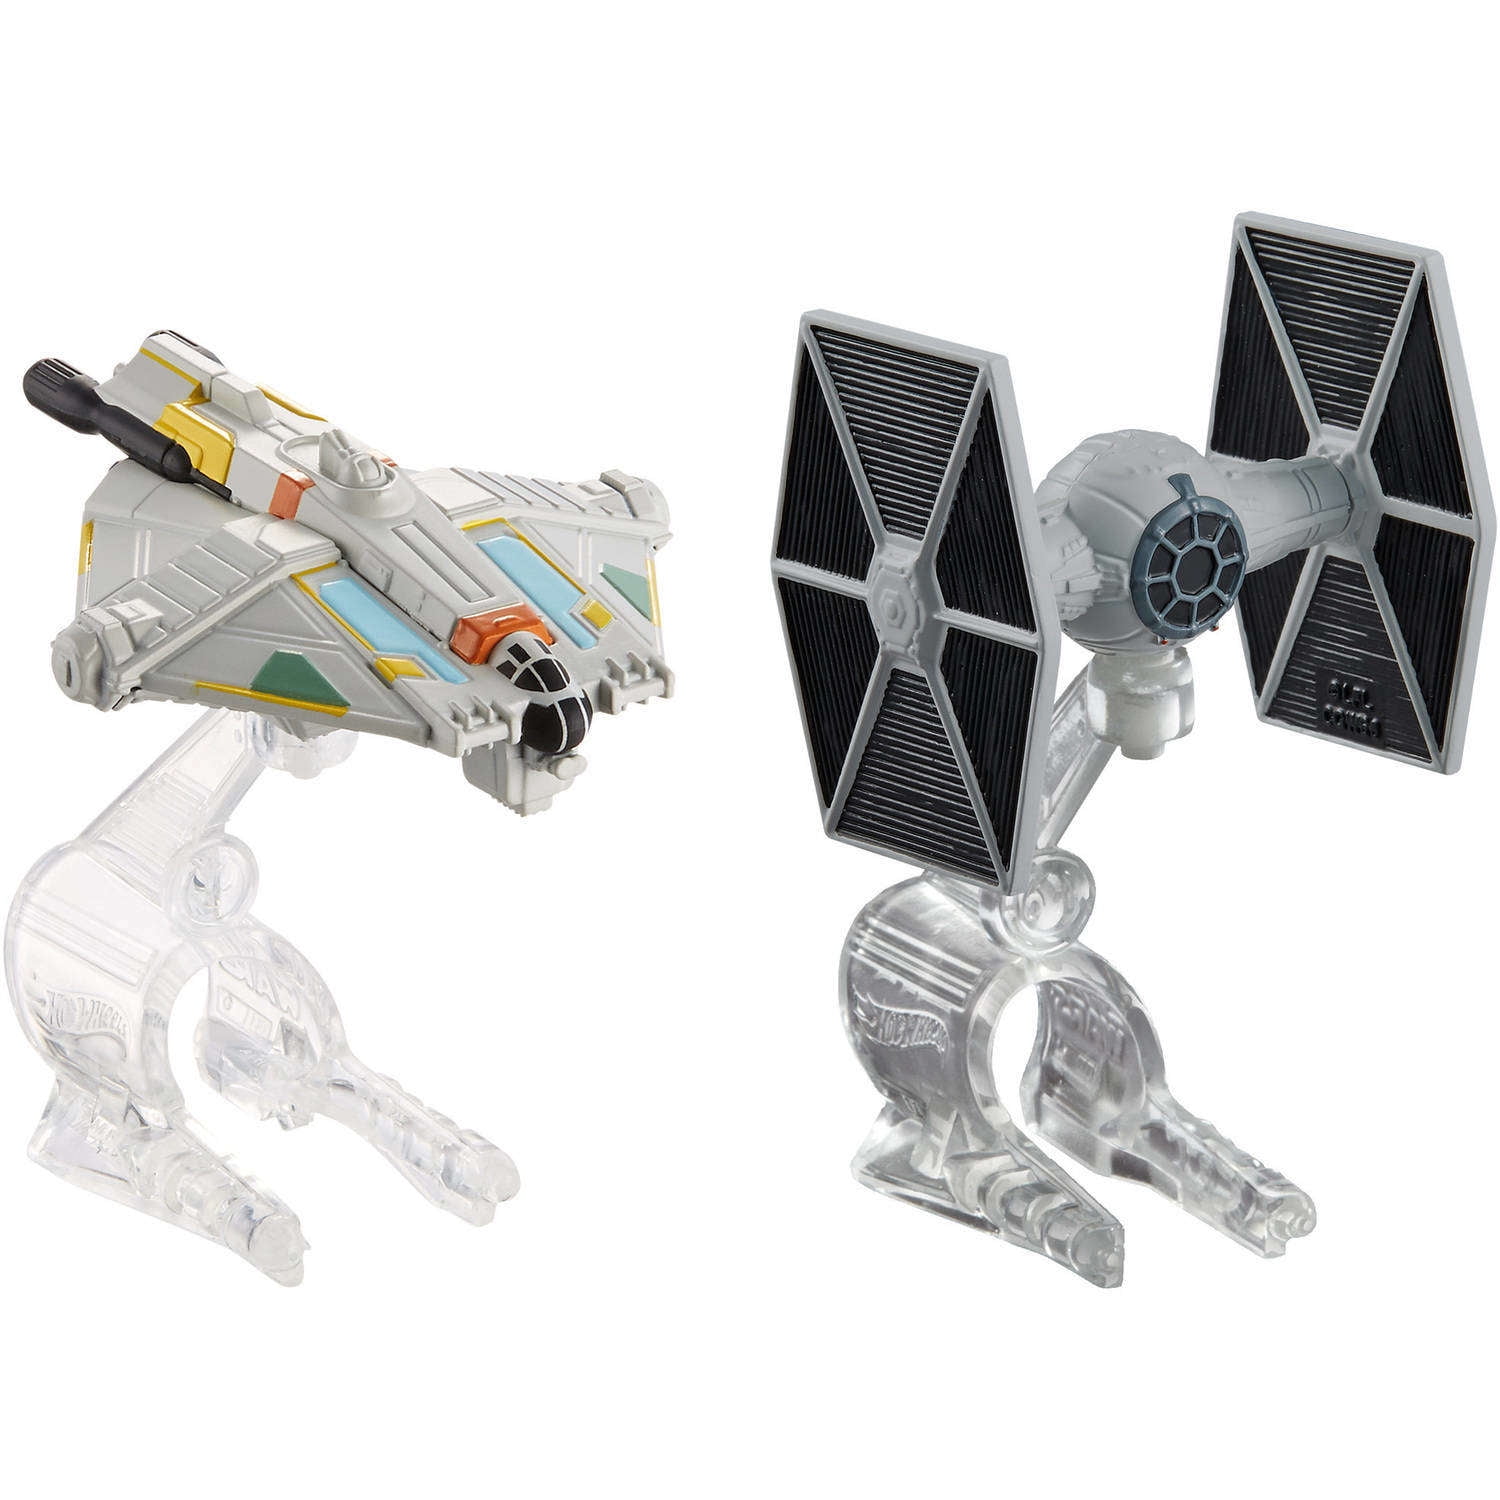 Details about    Hot Wheels Star Wars Starships Darth Vader's Tie Fighter Commemorative Series 